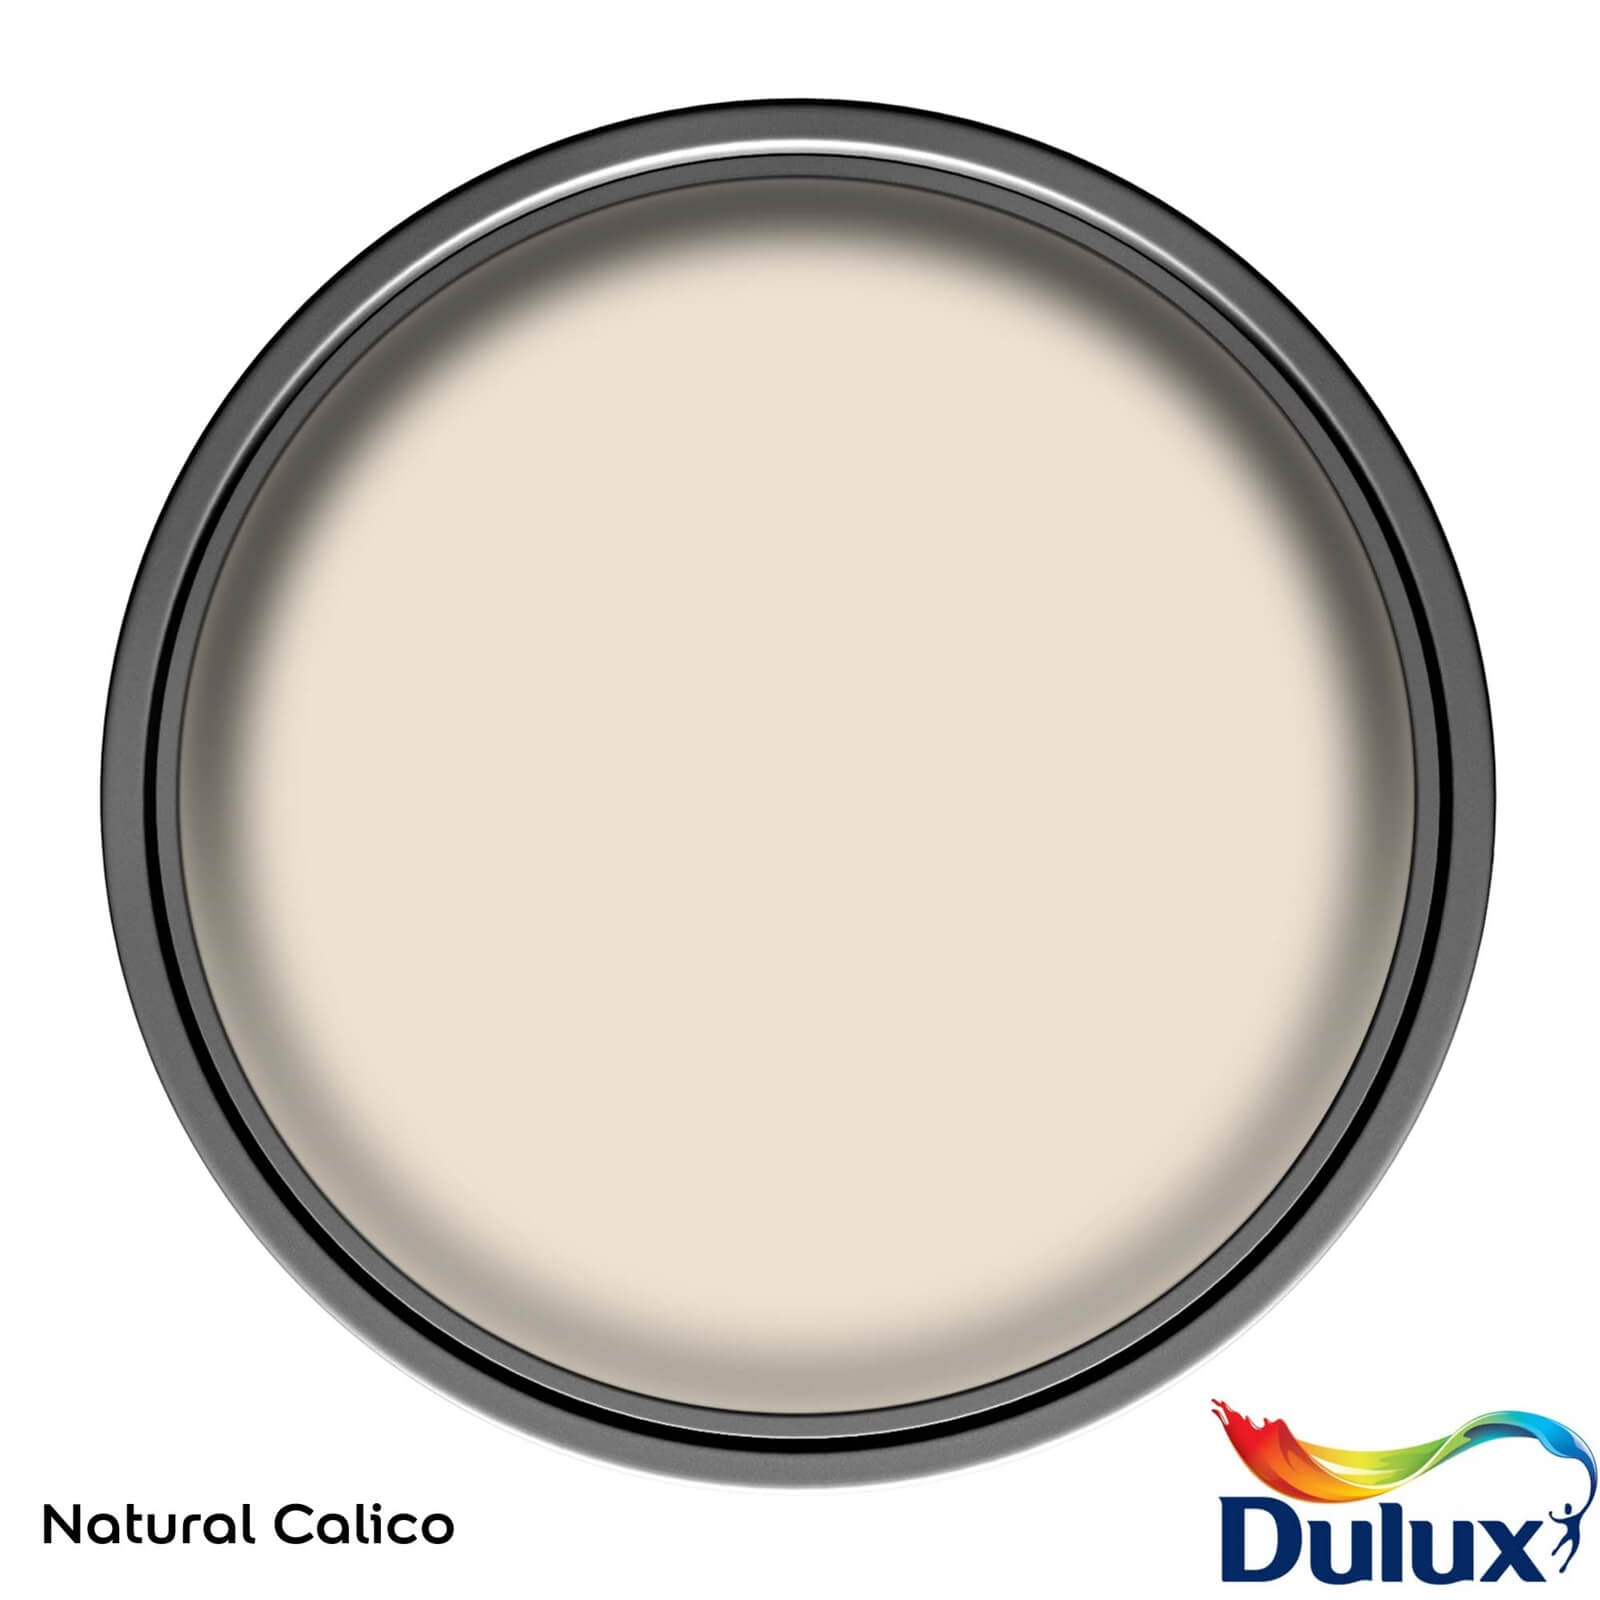 Dulux Quick Dry Satinwood Natural Calico - 750ml